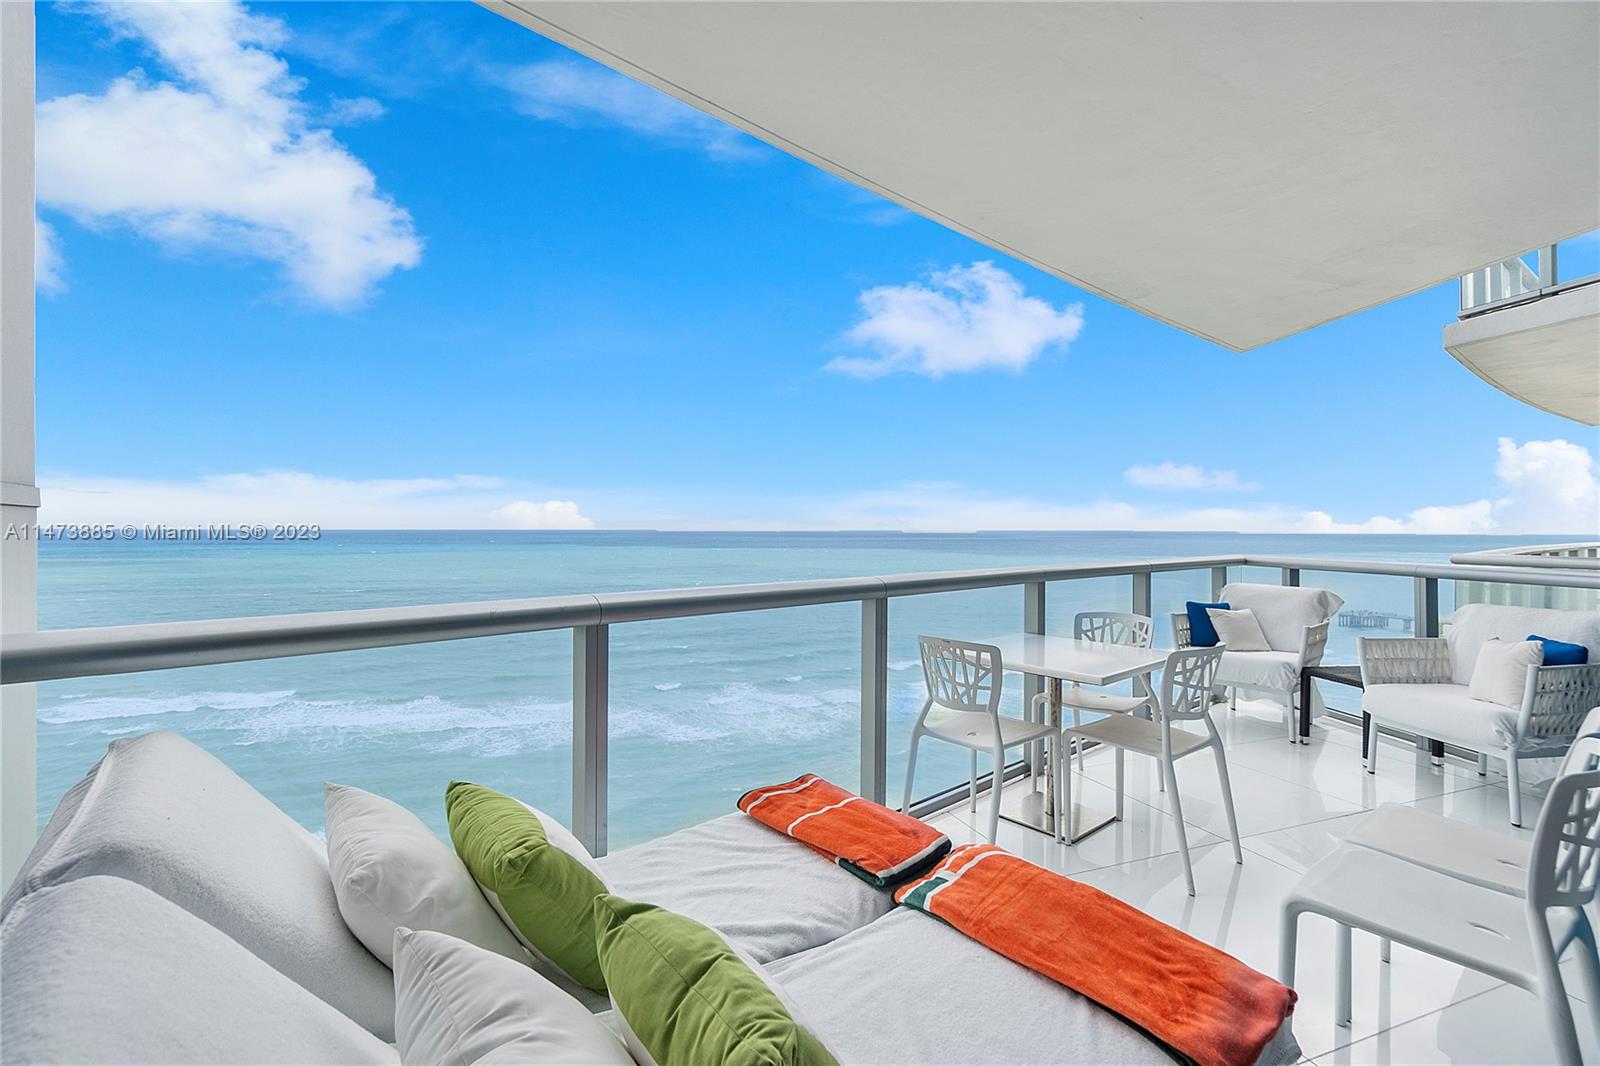 17001 Collins Avenue Unit 1703, Sunny Isles Beach, Florida, 33160, United States, 1 Bedroom Bedrooms, ,2 BathroomsBathrooms,Residential,For Sale,17001 Collins Avenue Unit 1703,1388702